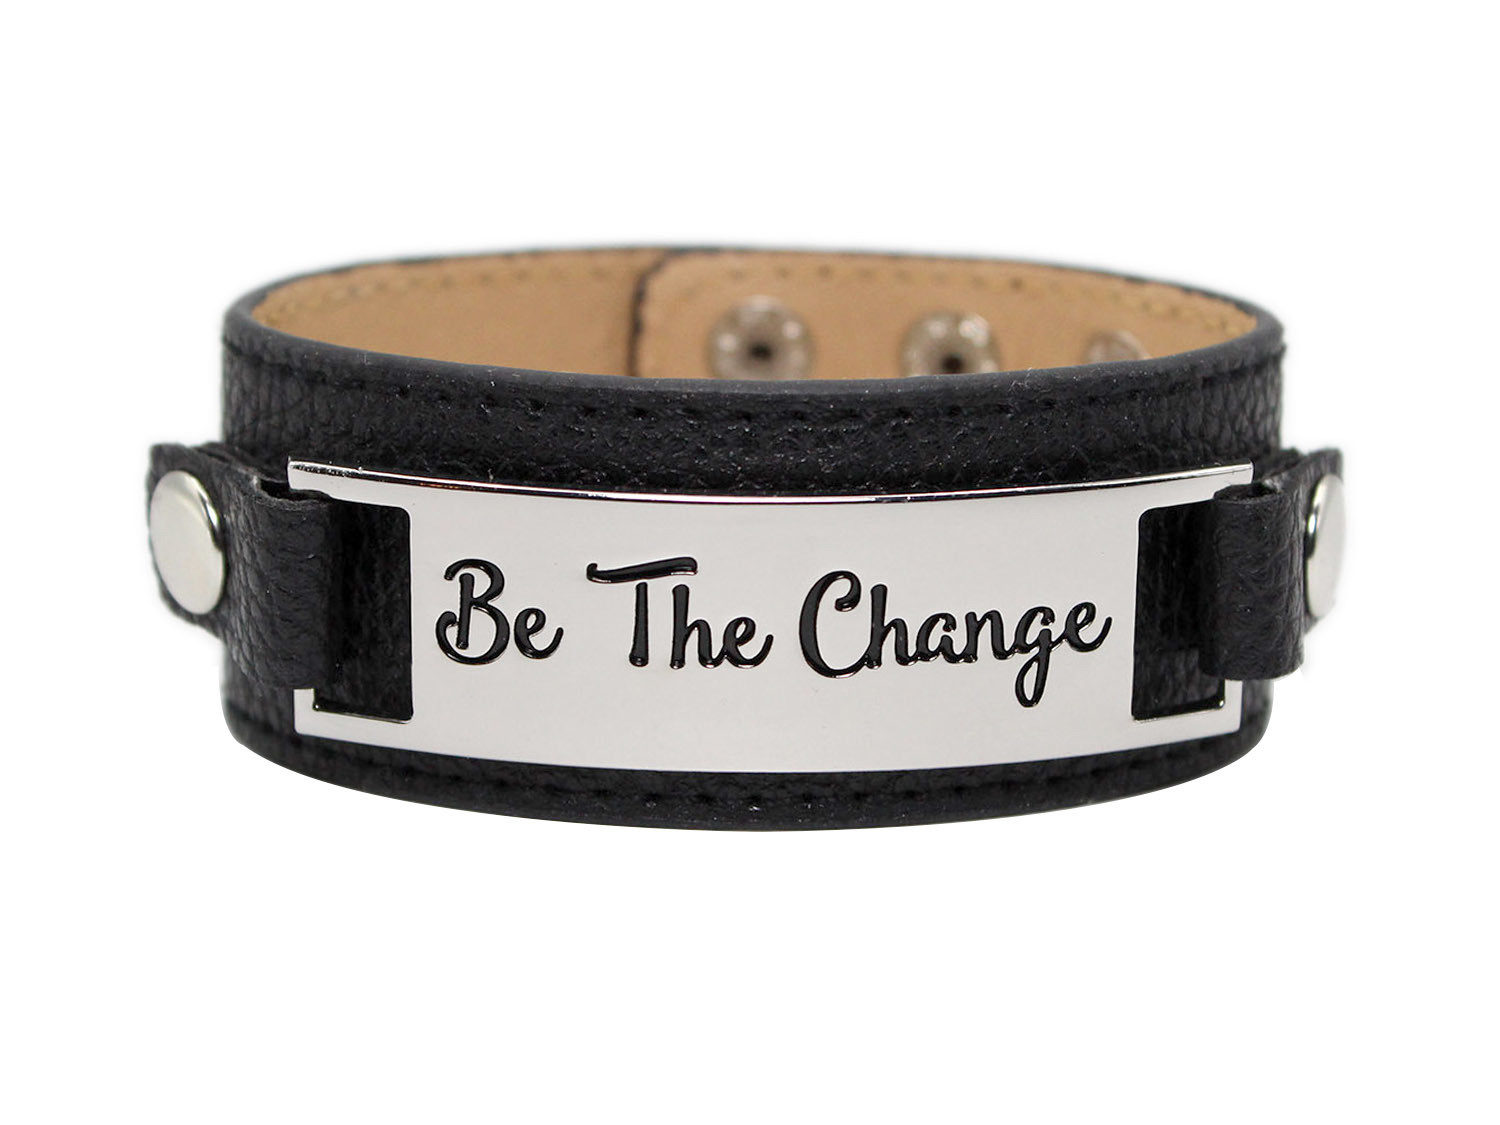 Classic Cuff with Metal Plaque "Be the Change"